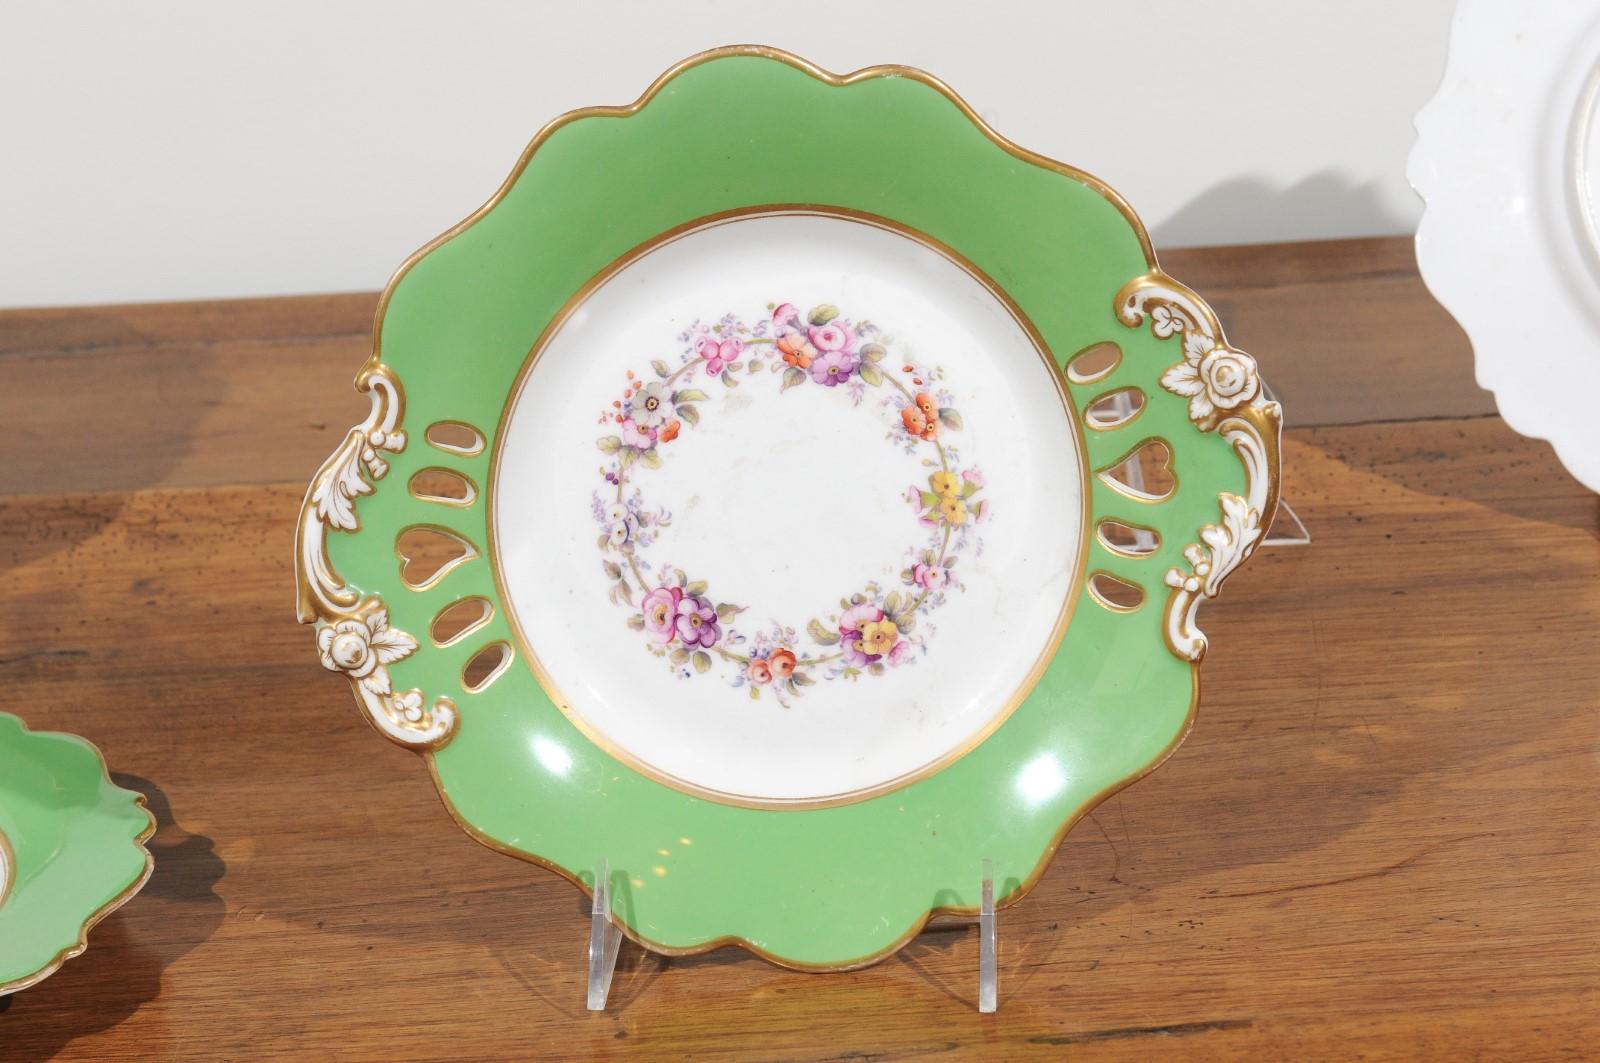 Ridgway Porcelain Dinner Plates and Compote with Green Rim and Floral Décor For Sale 2